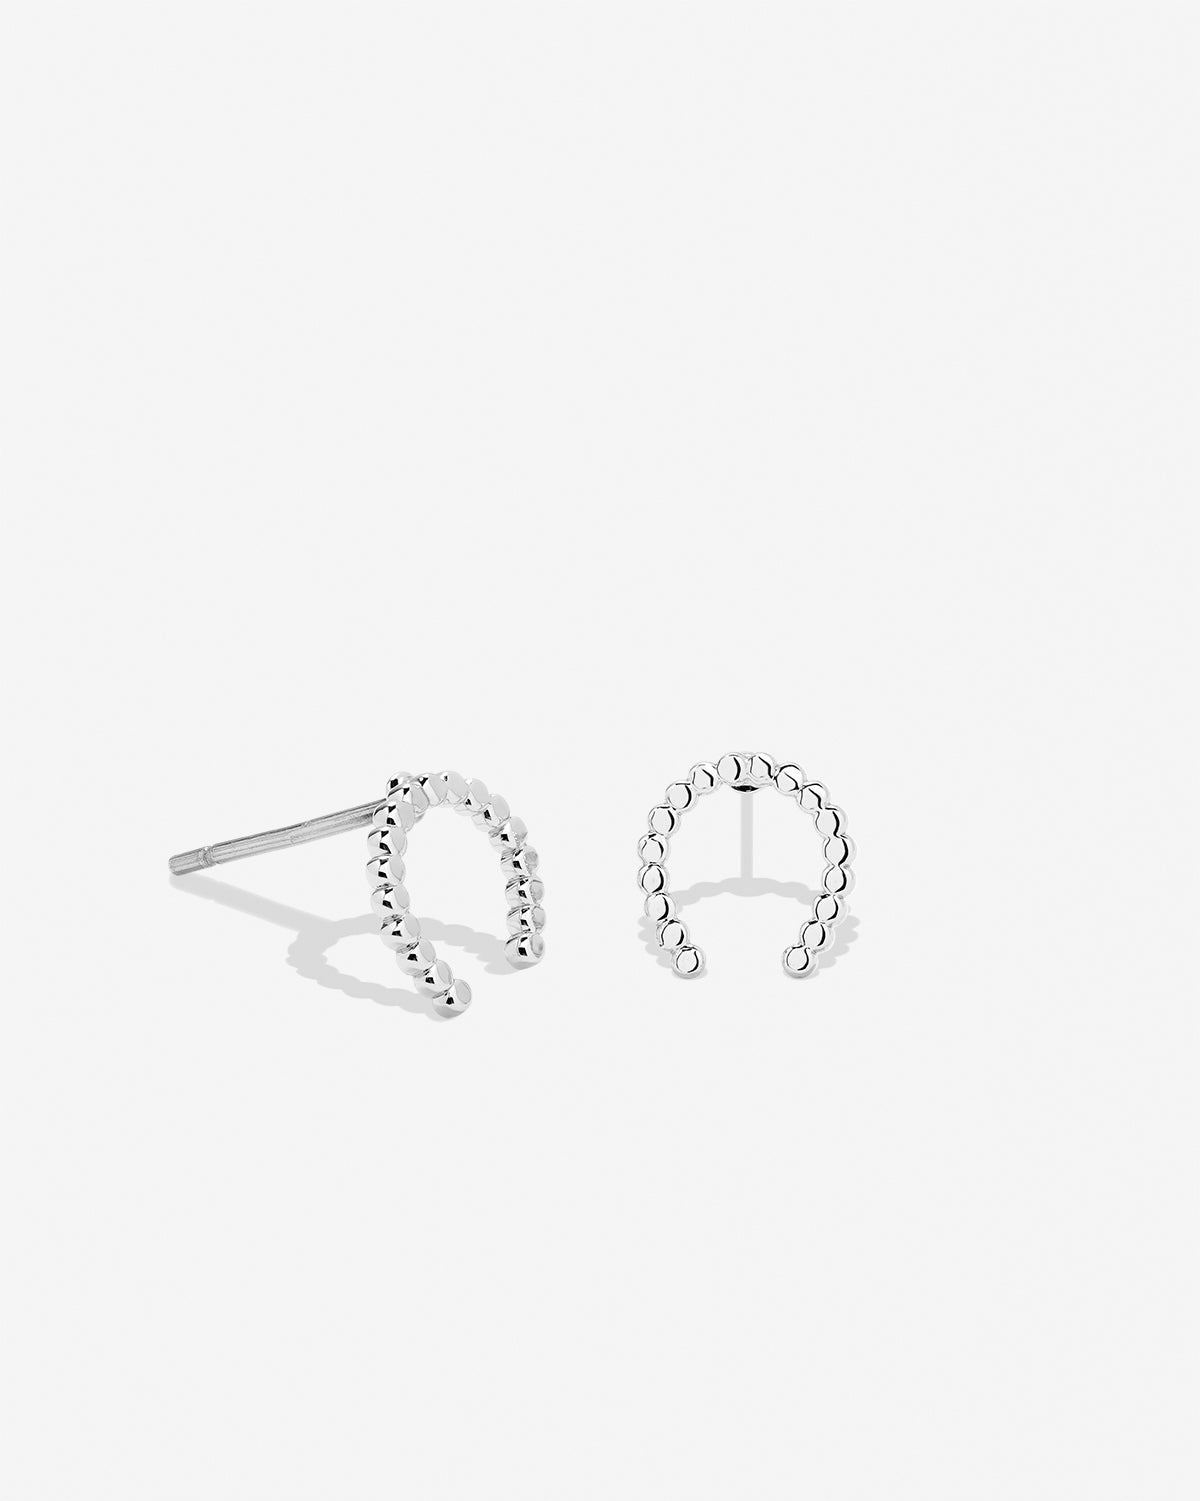 Just For Luck Horseshoe Earrings | Bryan Anthonys